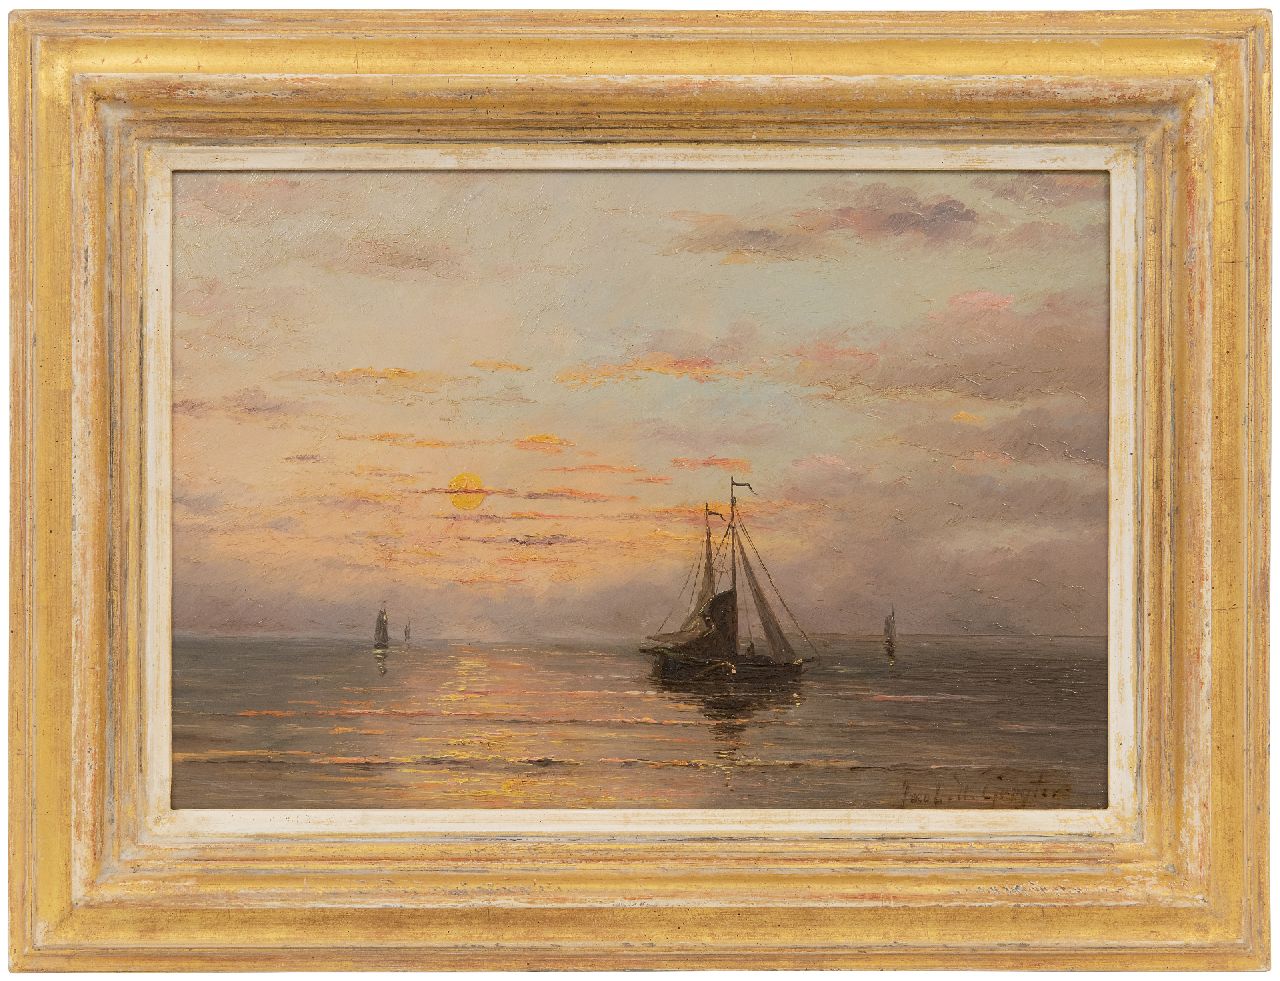 Gruijter J.W.  | Jacob Willem Gruijter | Paintings offered for sale | Fishing boats on a calm sea, oil on panel 22.6 x 33.0 cm, signed l.r.